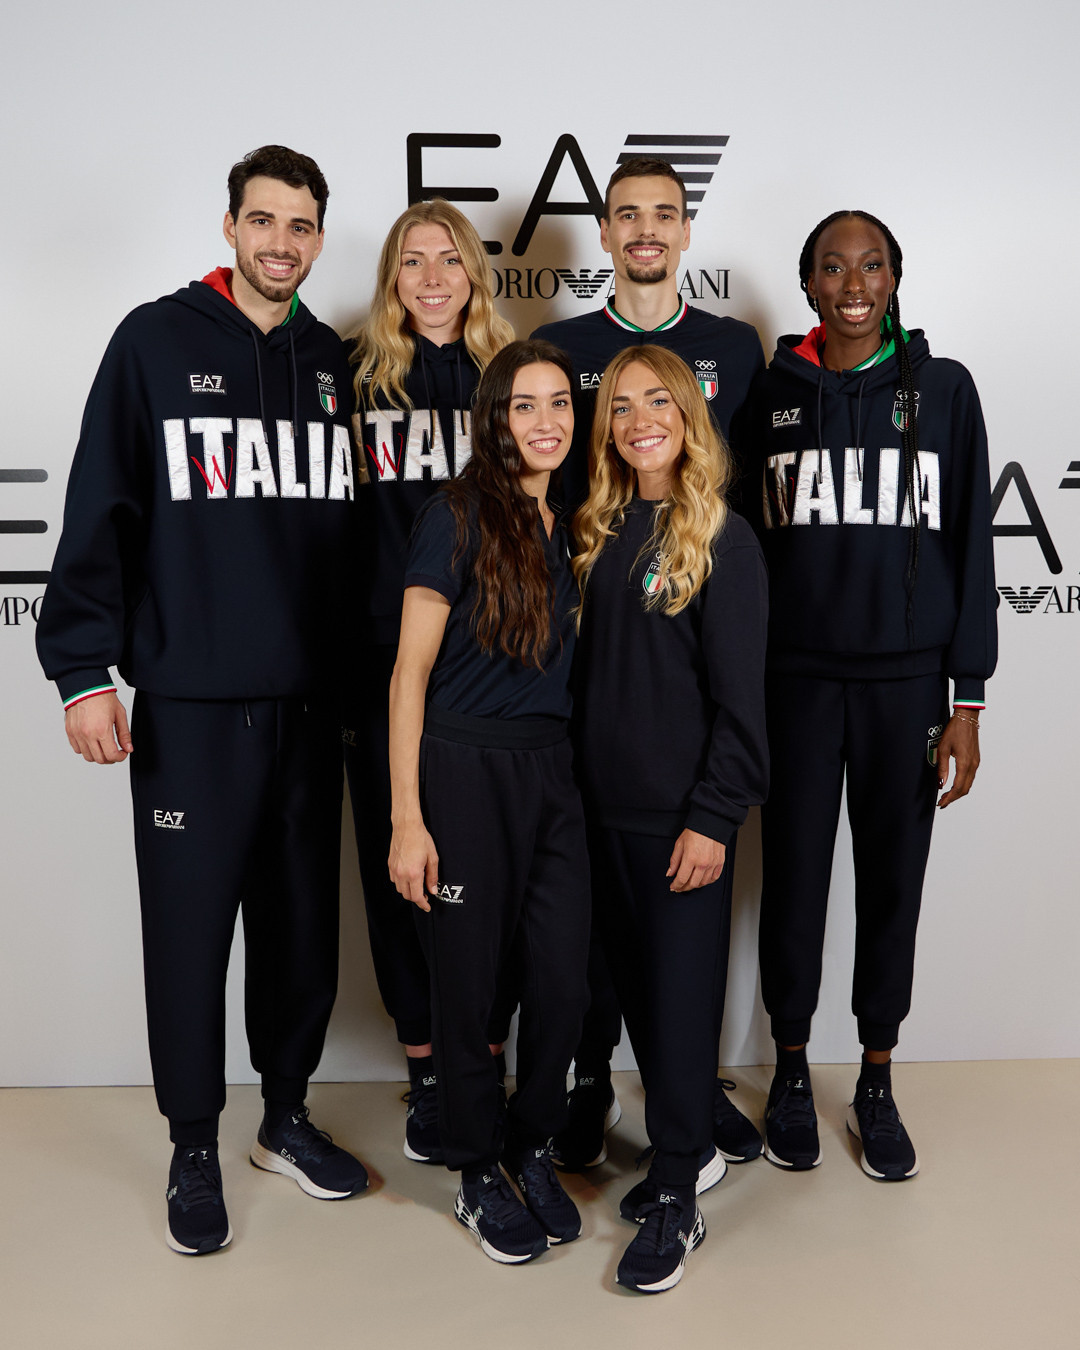 The Azzurri colours are coming to Sicily: Palermo and Catania set to host  four games involving the National Team, the Under-21s and Italy Women